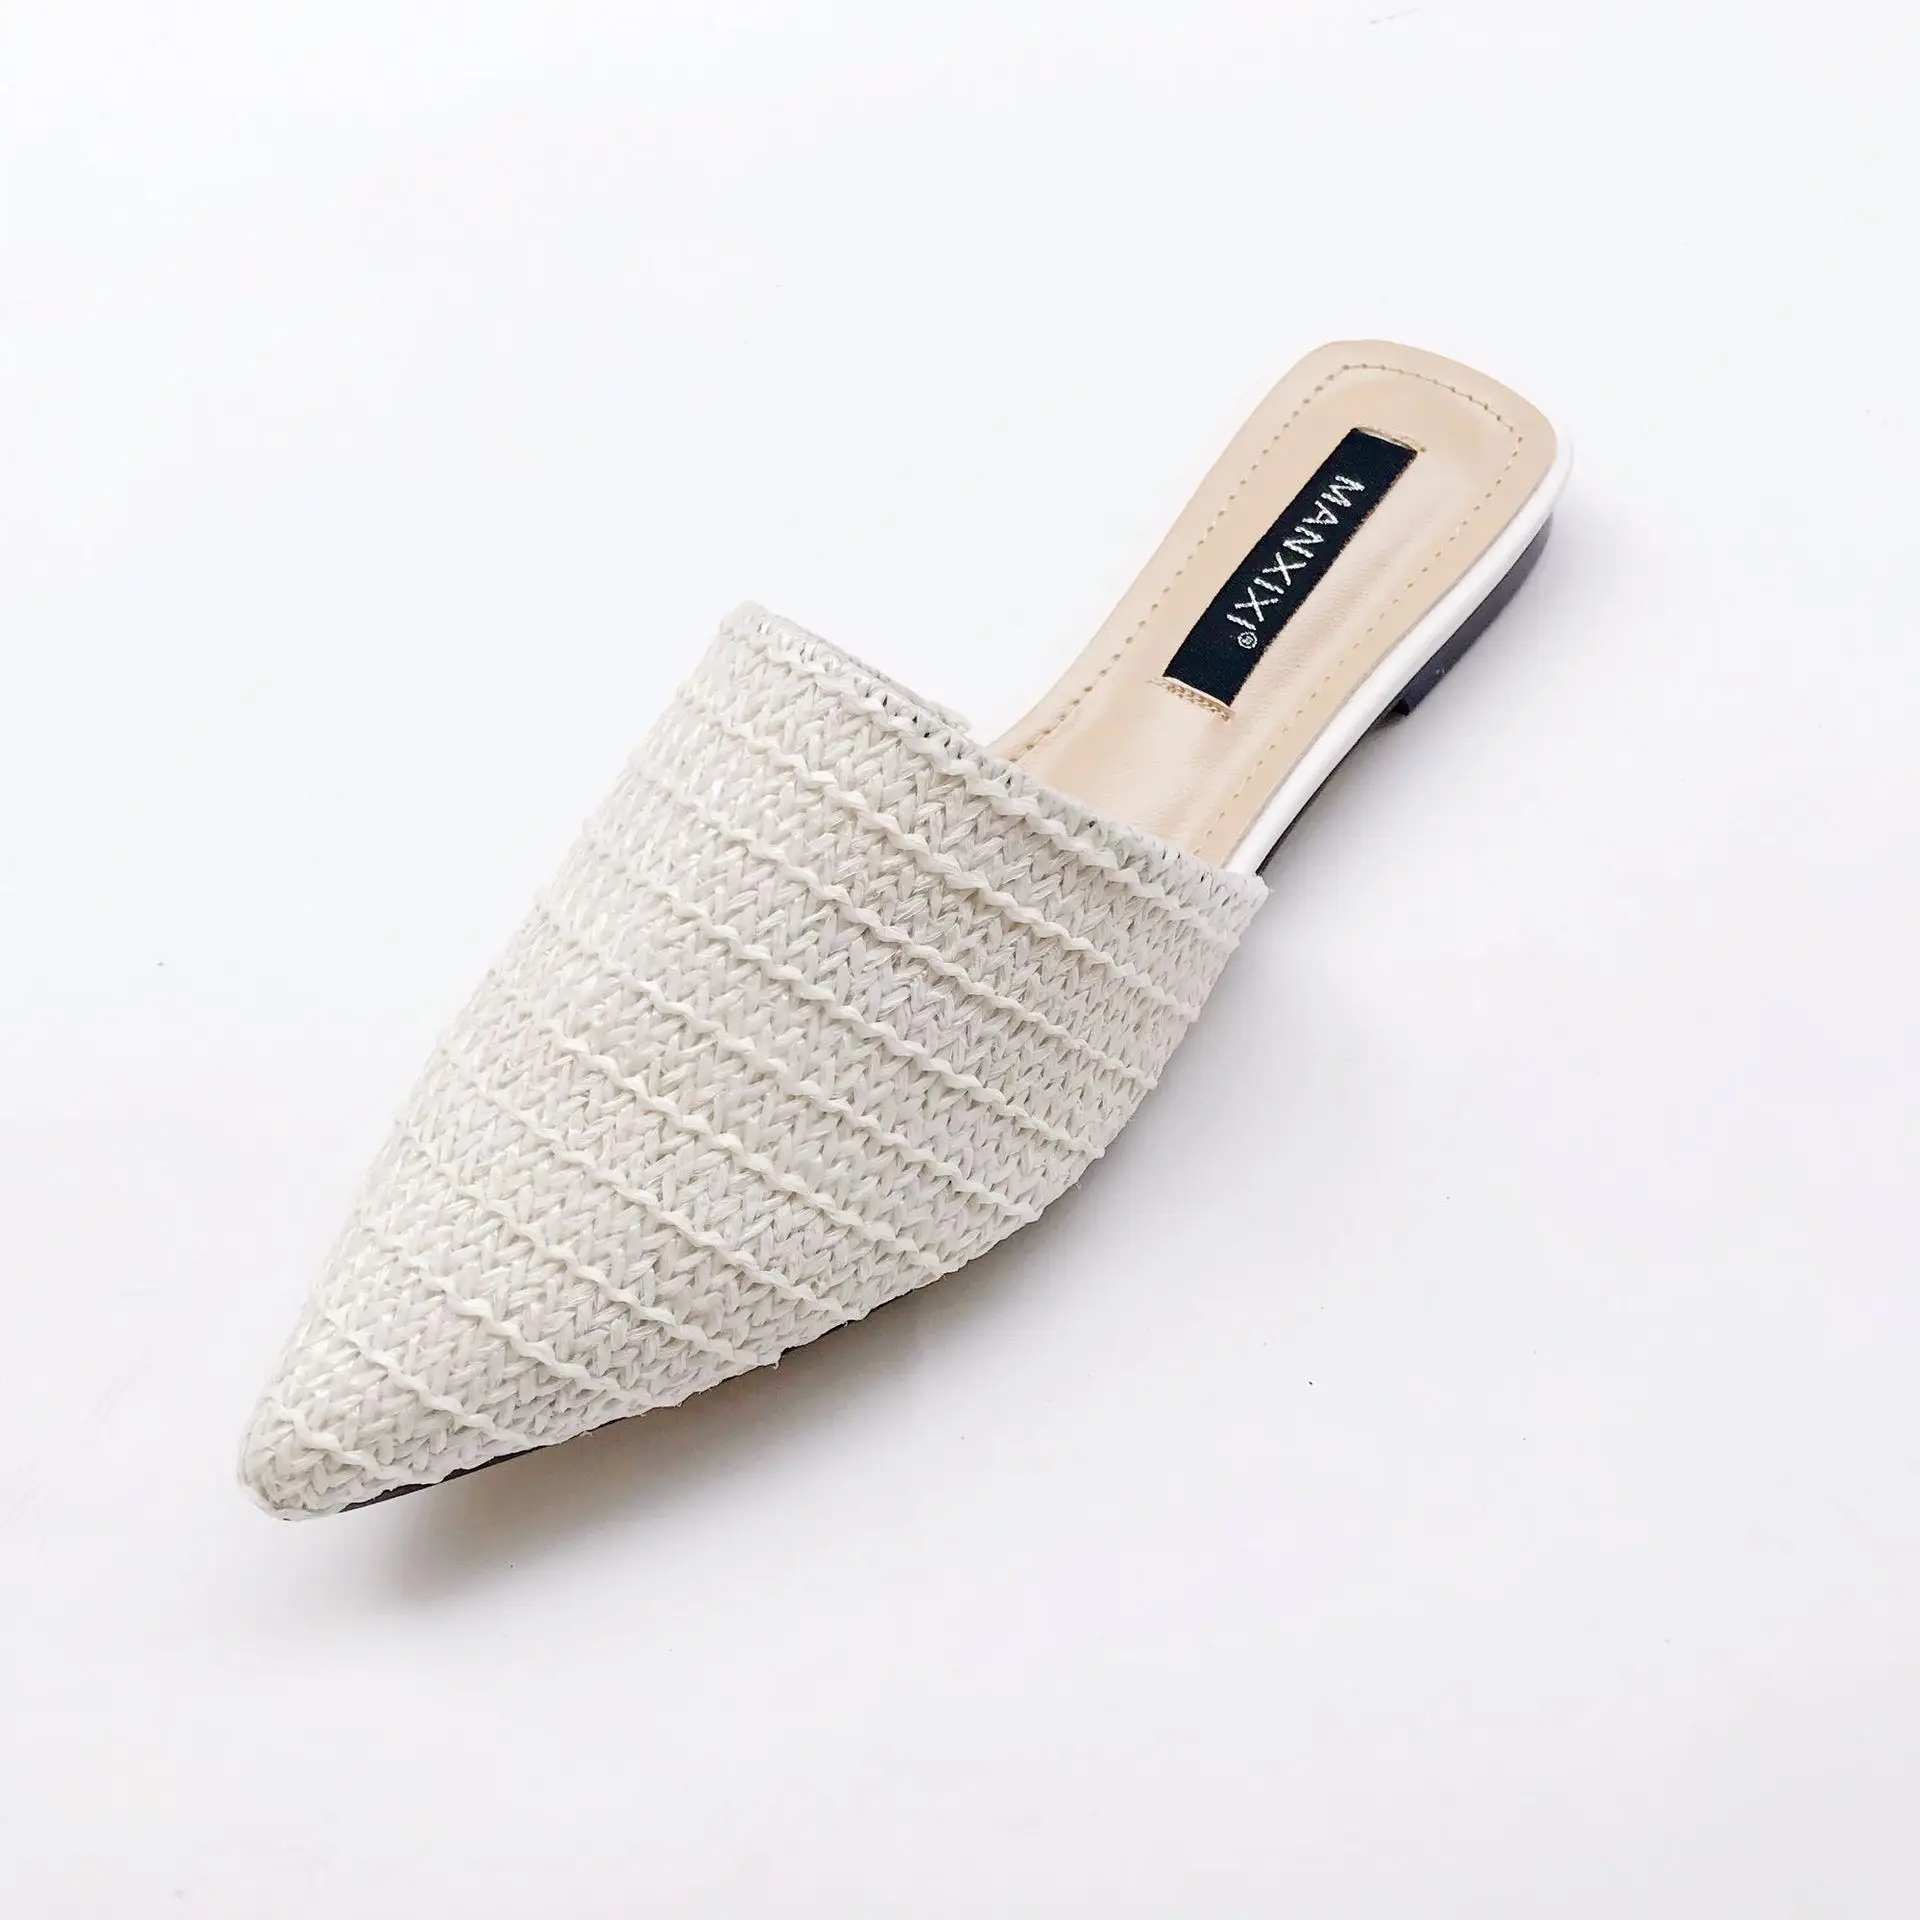 

2019 Women Slippers Fashion Pointed Toe Weave Mules Shoes Flat Slides Summer Beach Flip Flop Outside Slip On Shoes